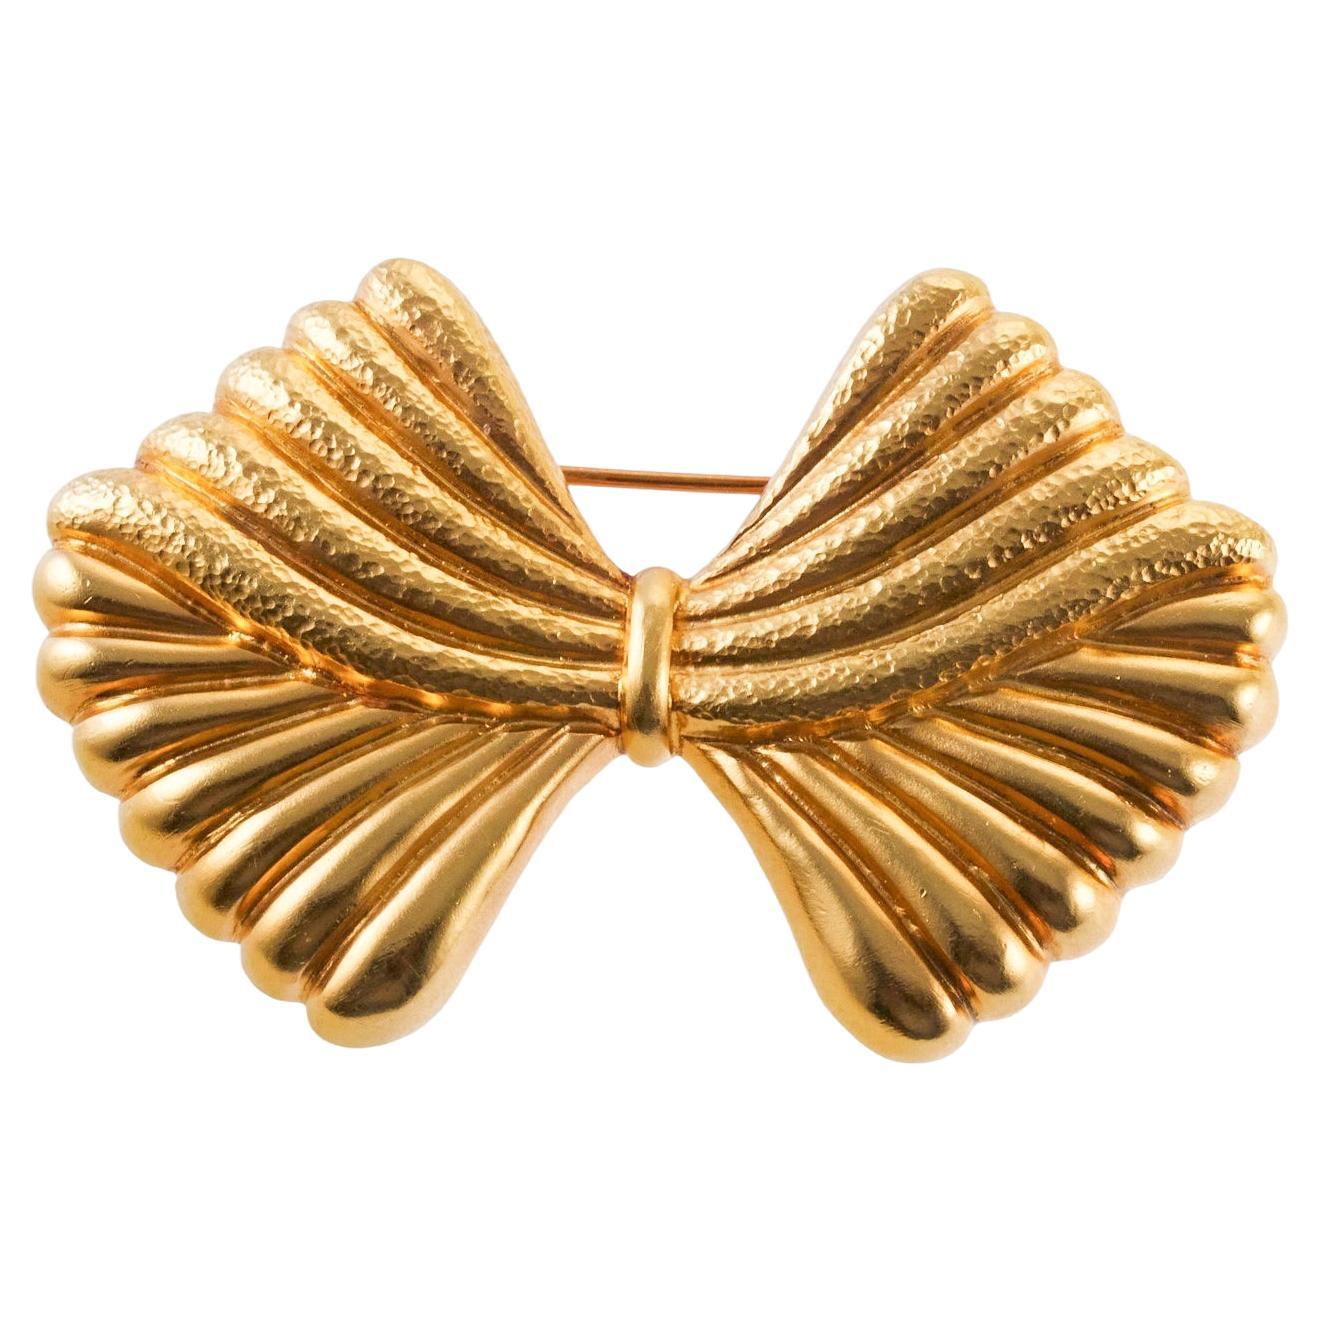 Ilias Lalaounis Greece Gold Bow Brooch